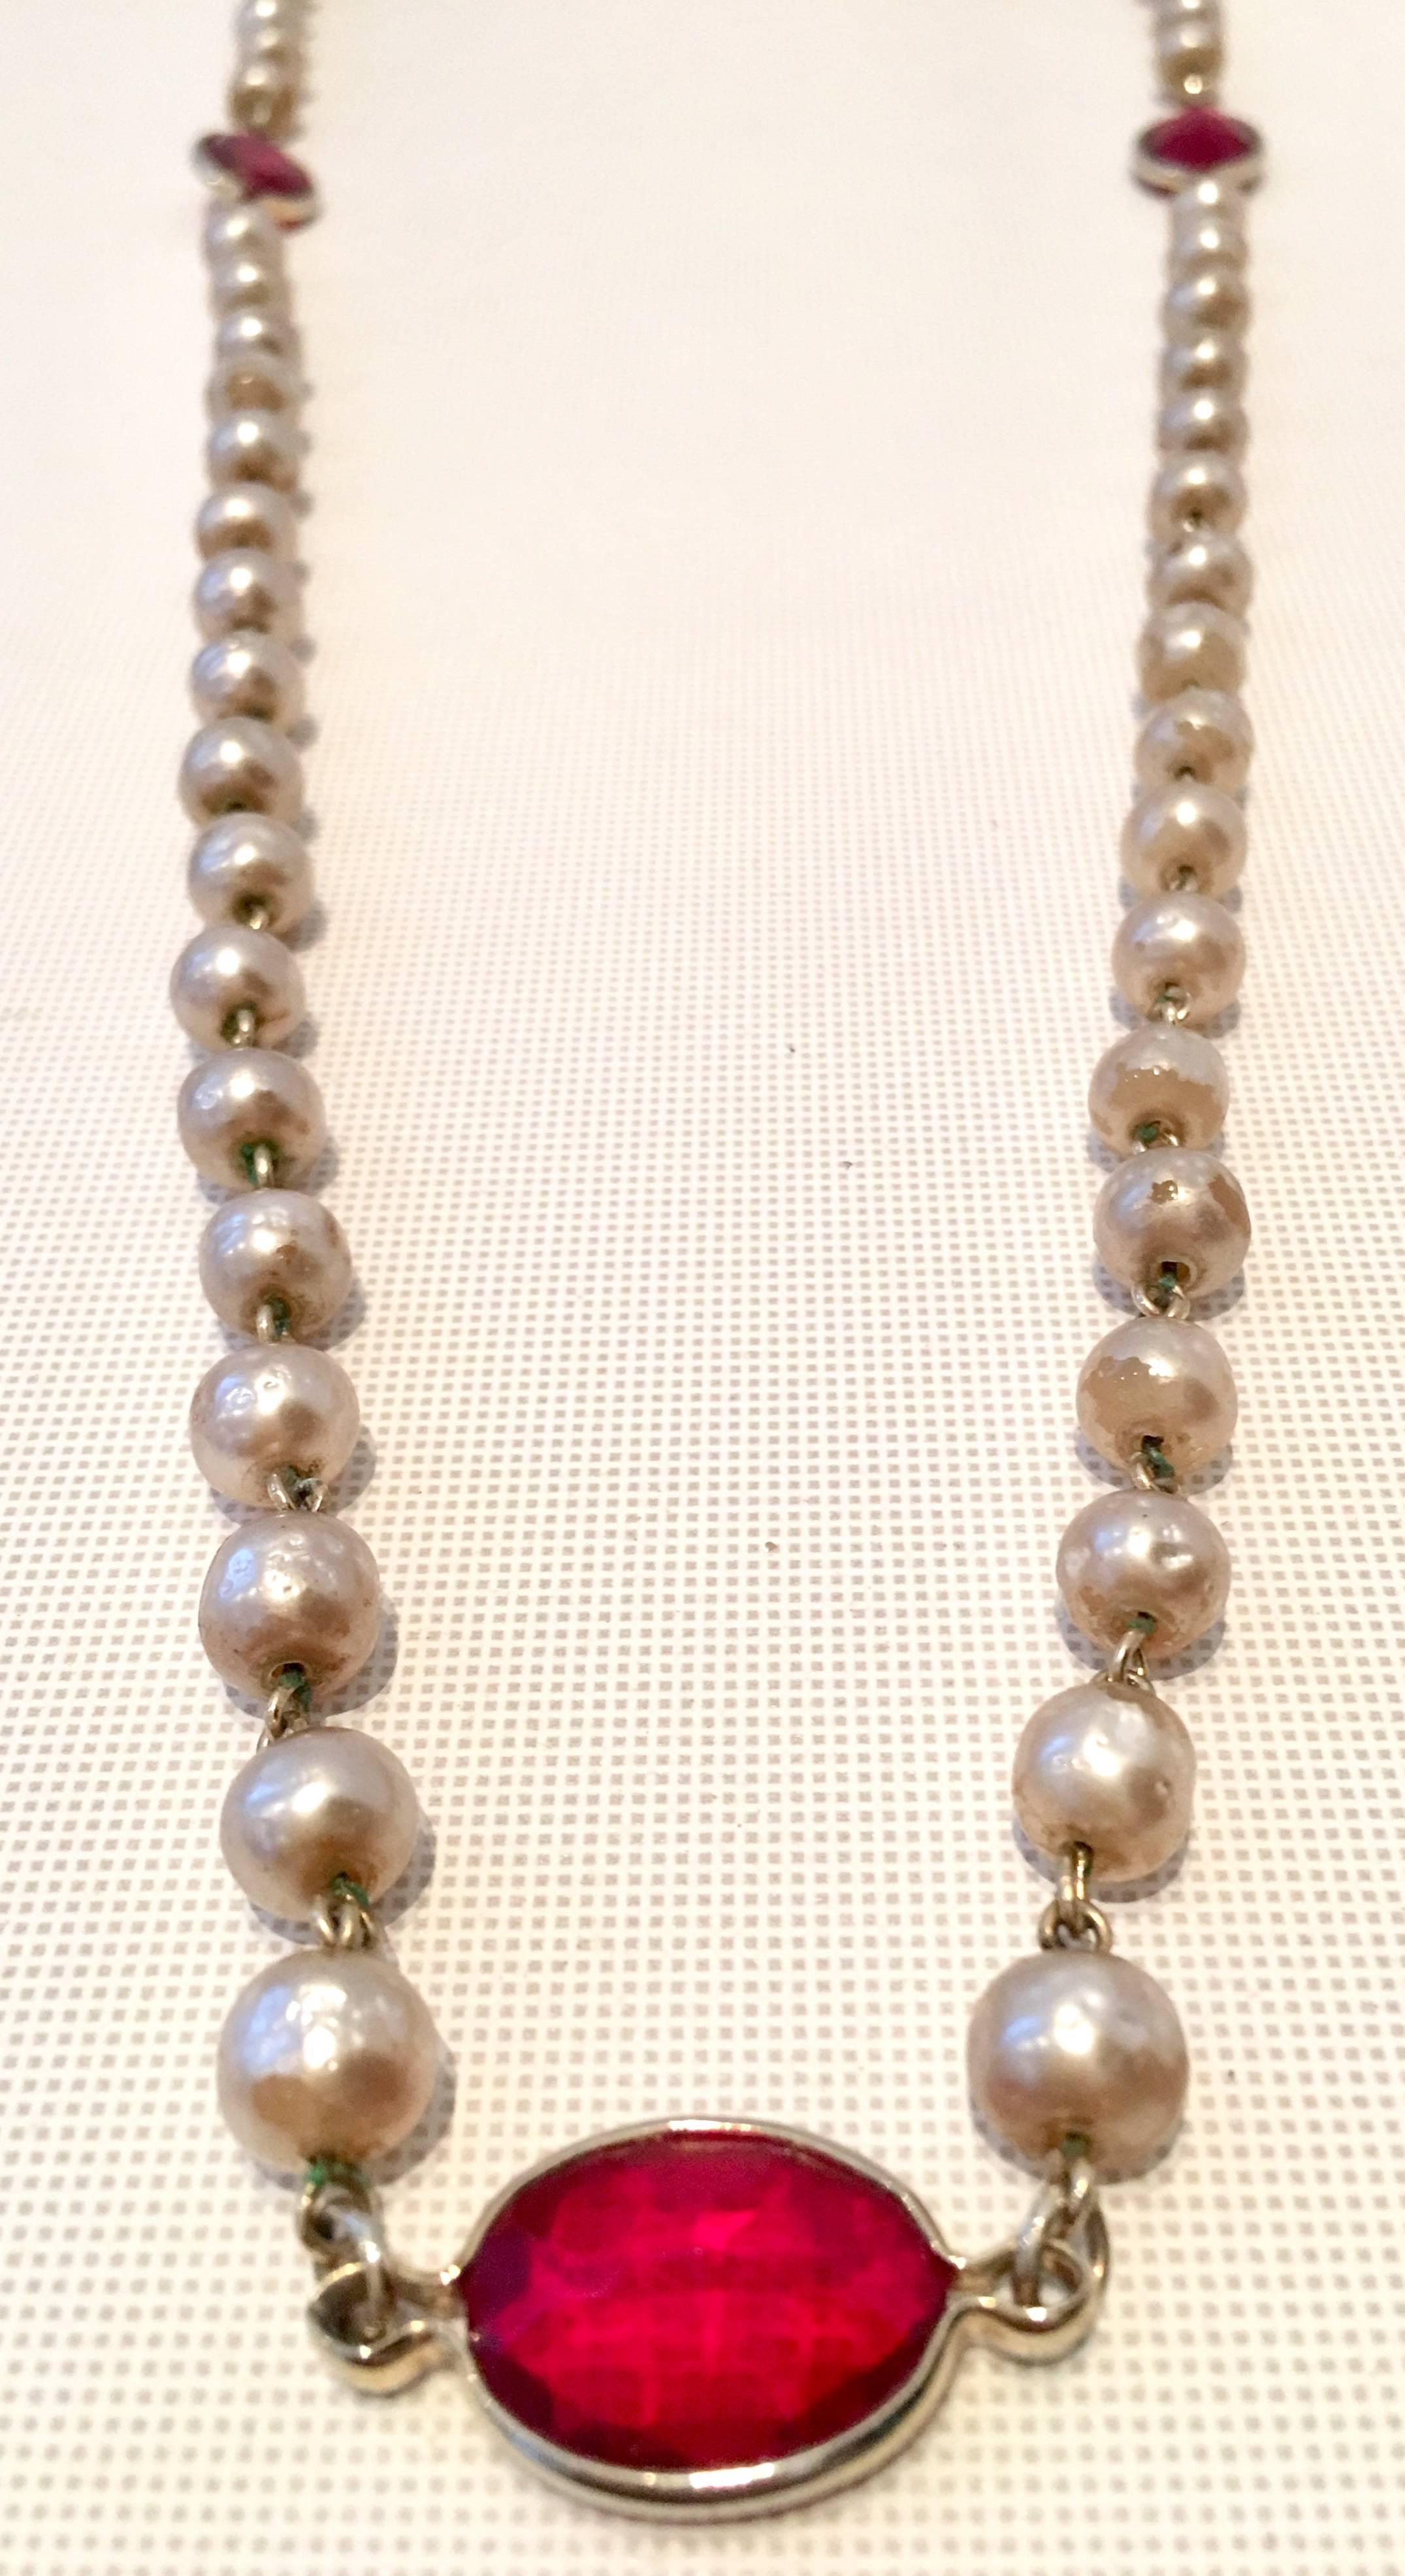 Women's or Men's Vintage Faux Baroque Pearl Bead and Art Glass Opera Length Necklace by Coro